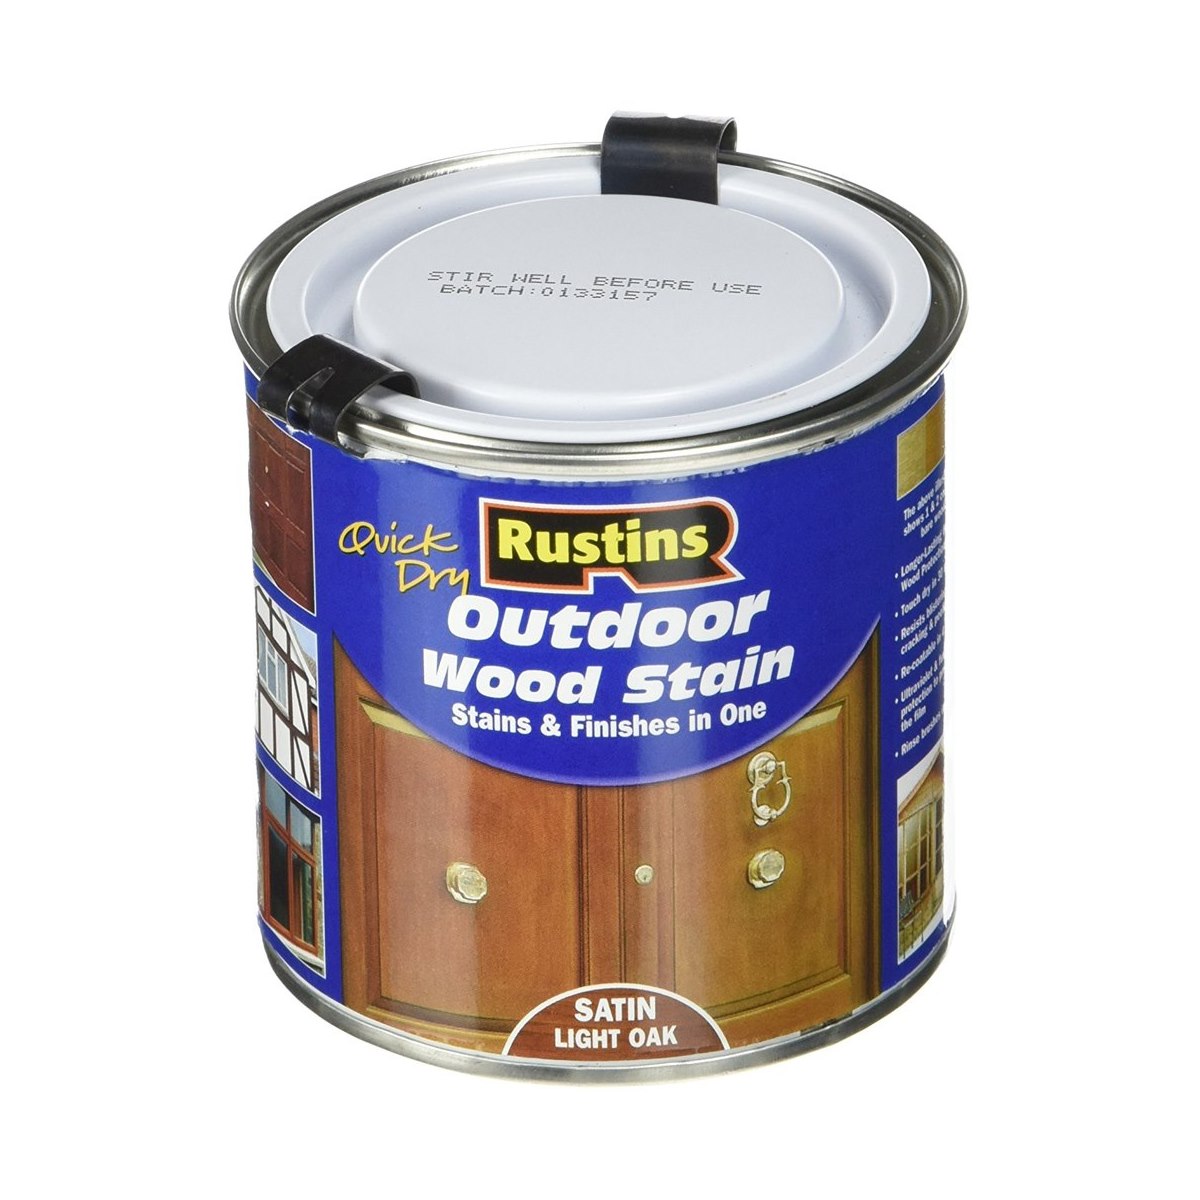 Rustins Quick Dry Outdoor Wood Stain Light Oak 2.5 Litre